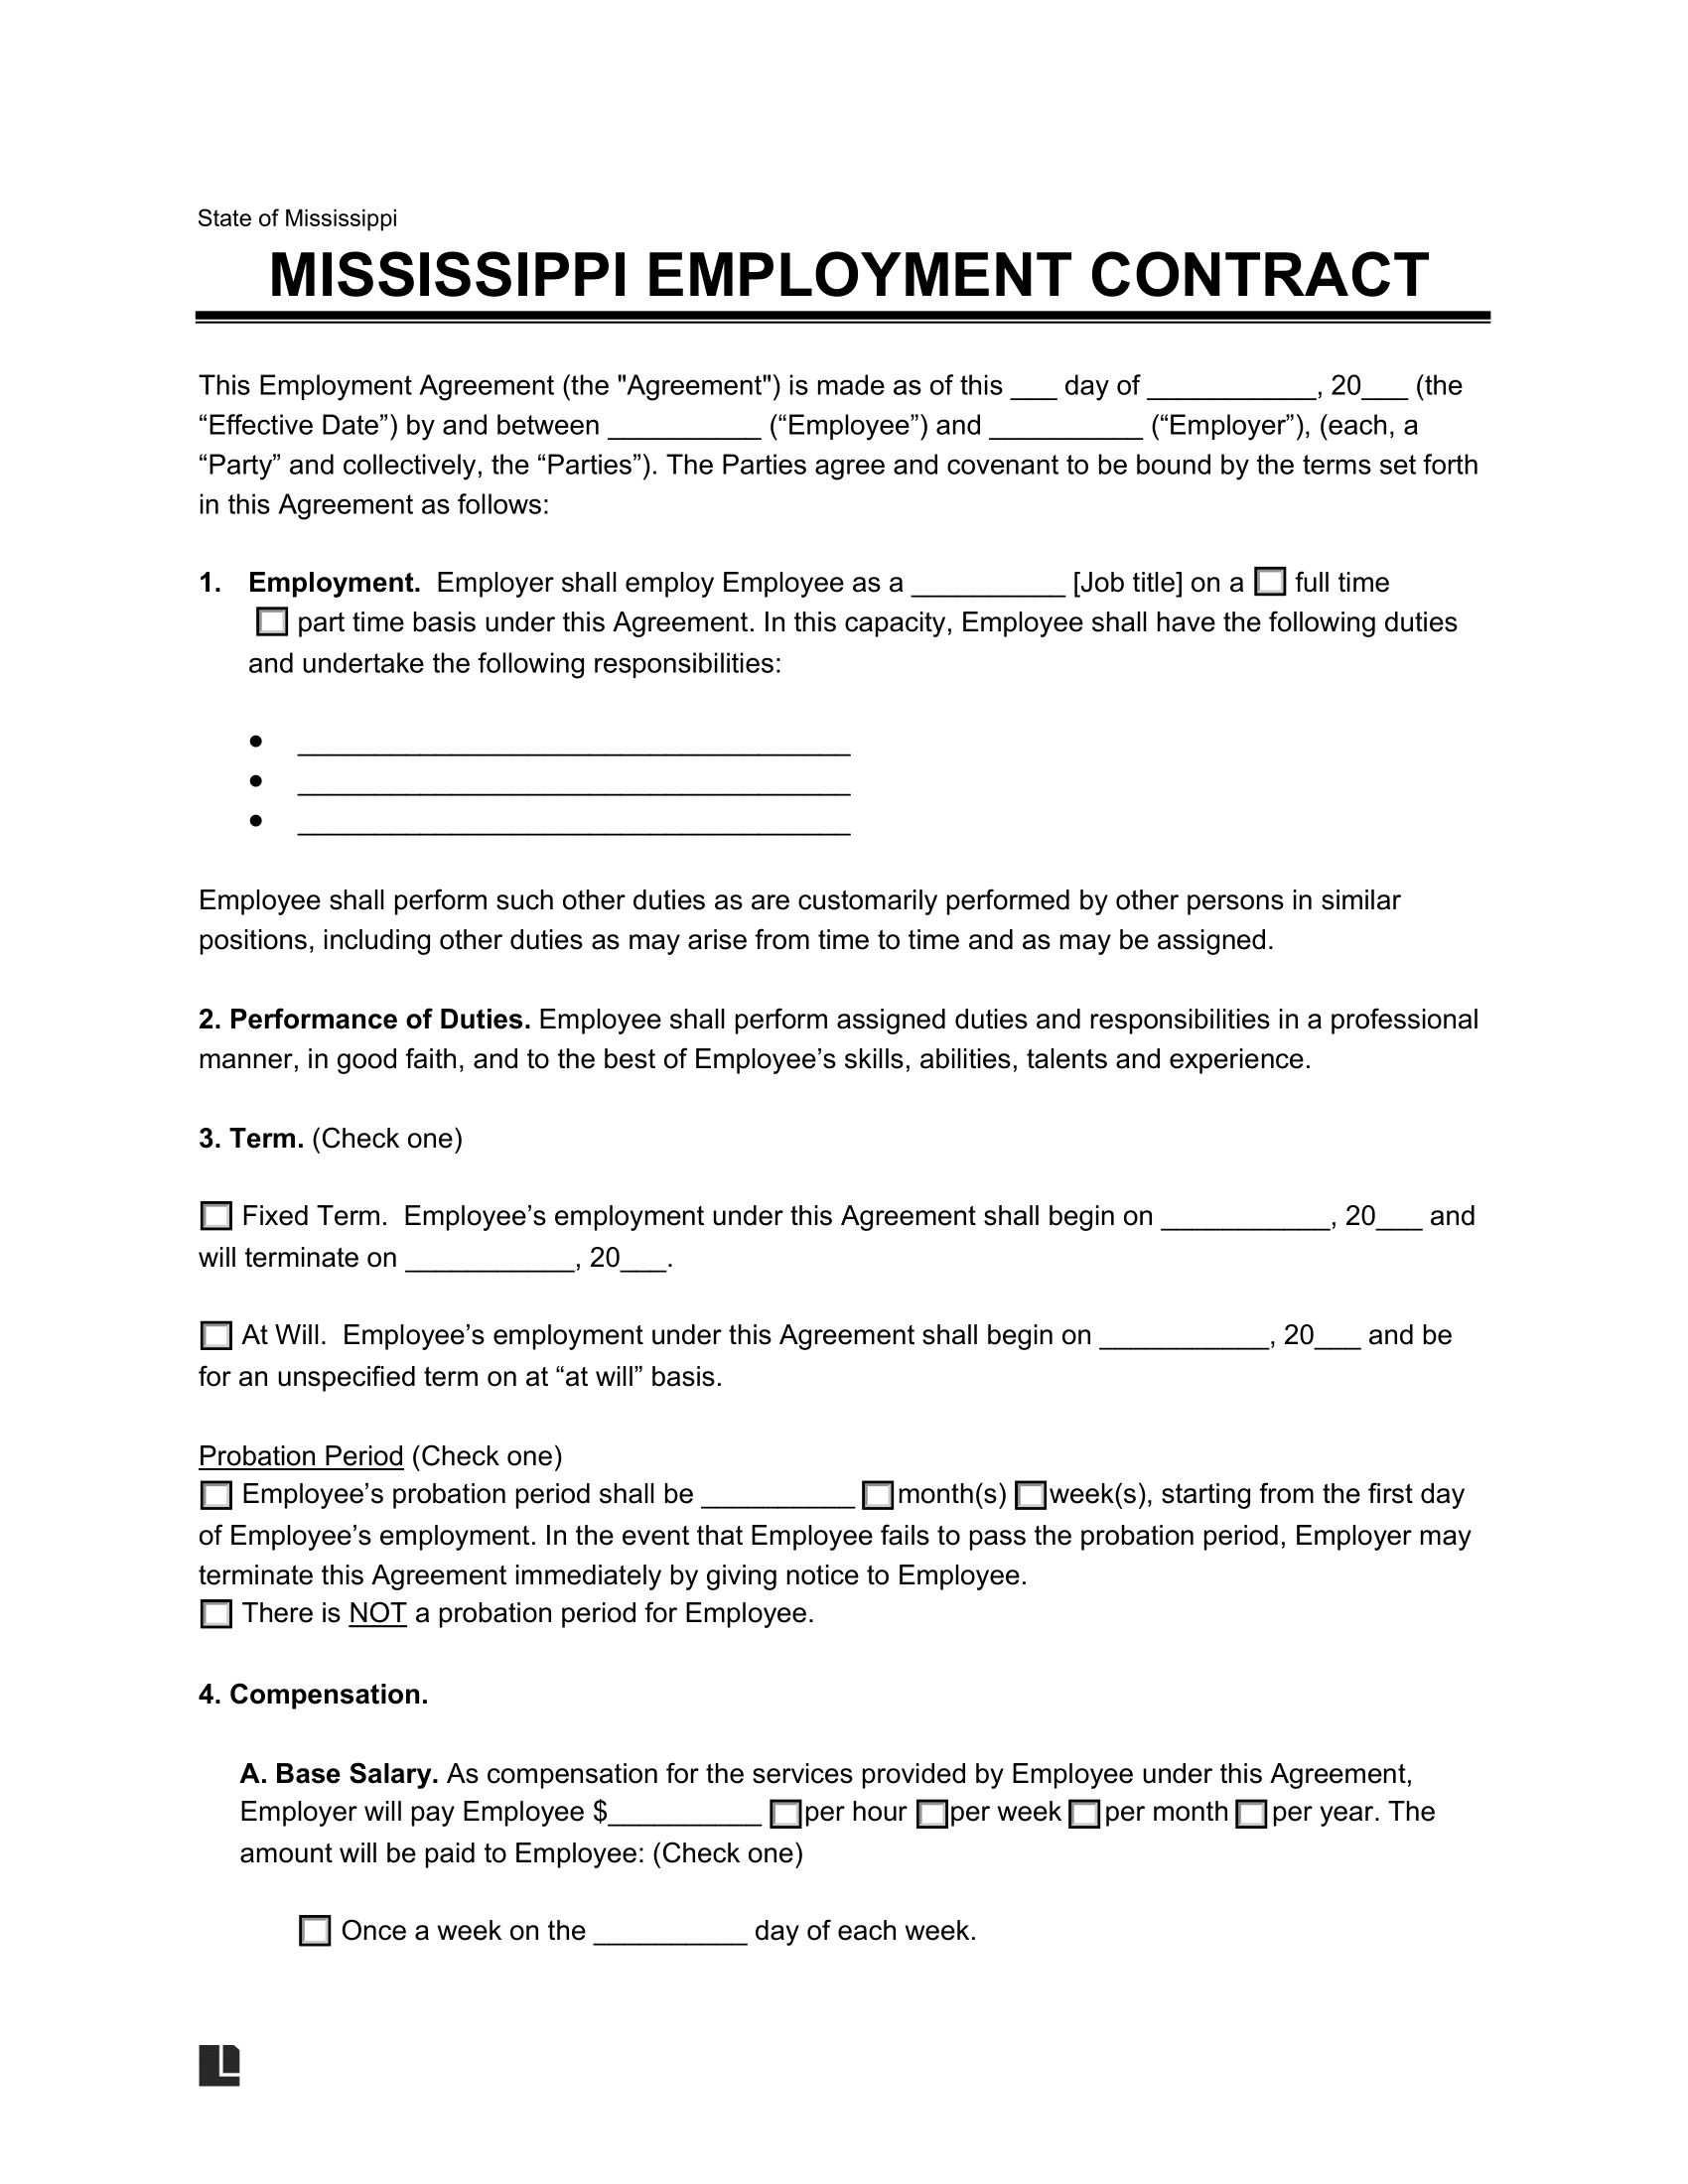 mississippi employment contract template